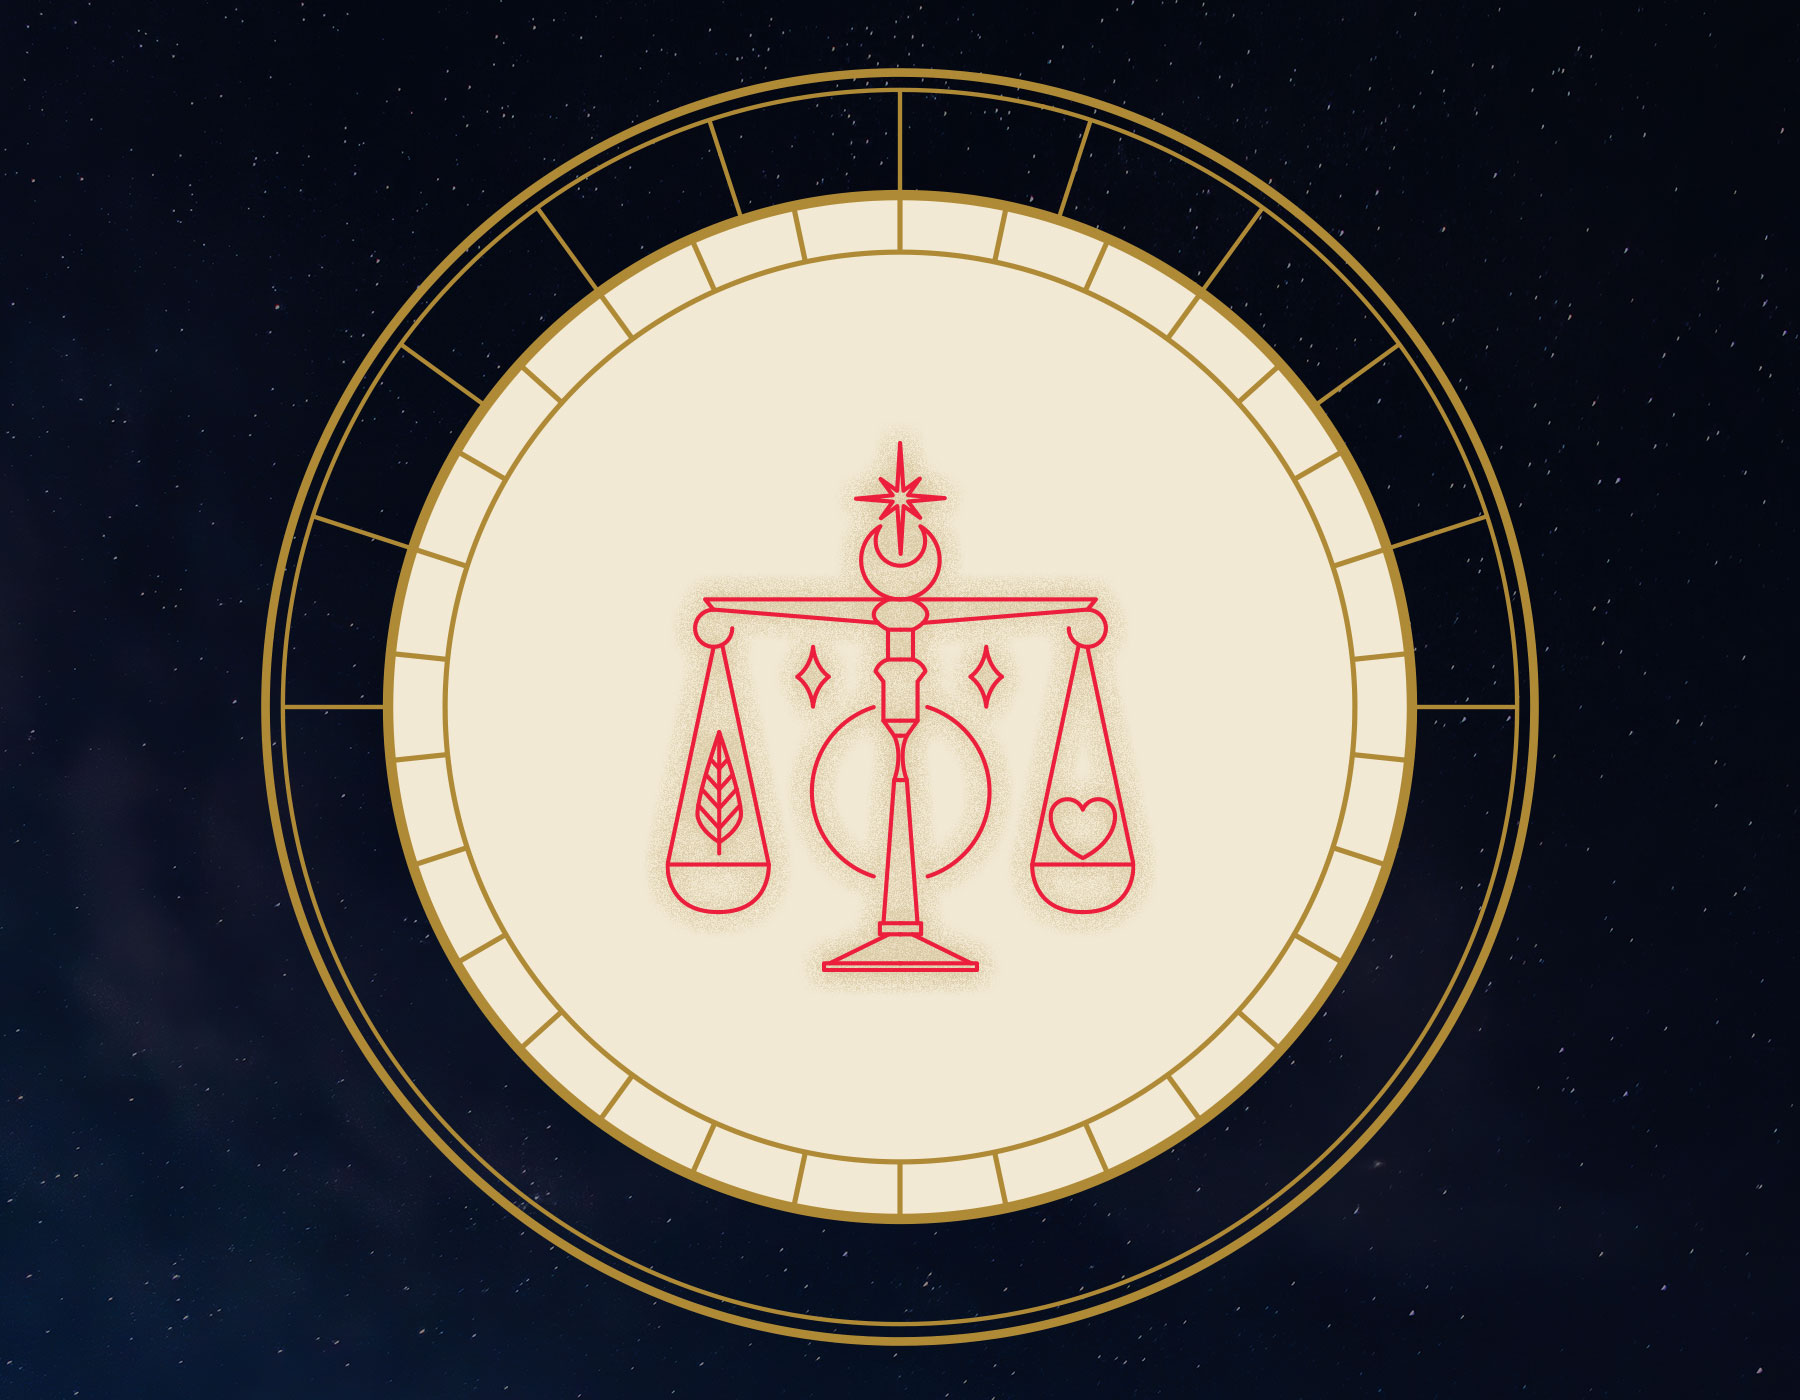 The Characteristics of Libra individual based on their Sun and Moon signs